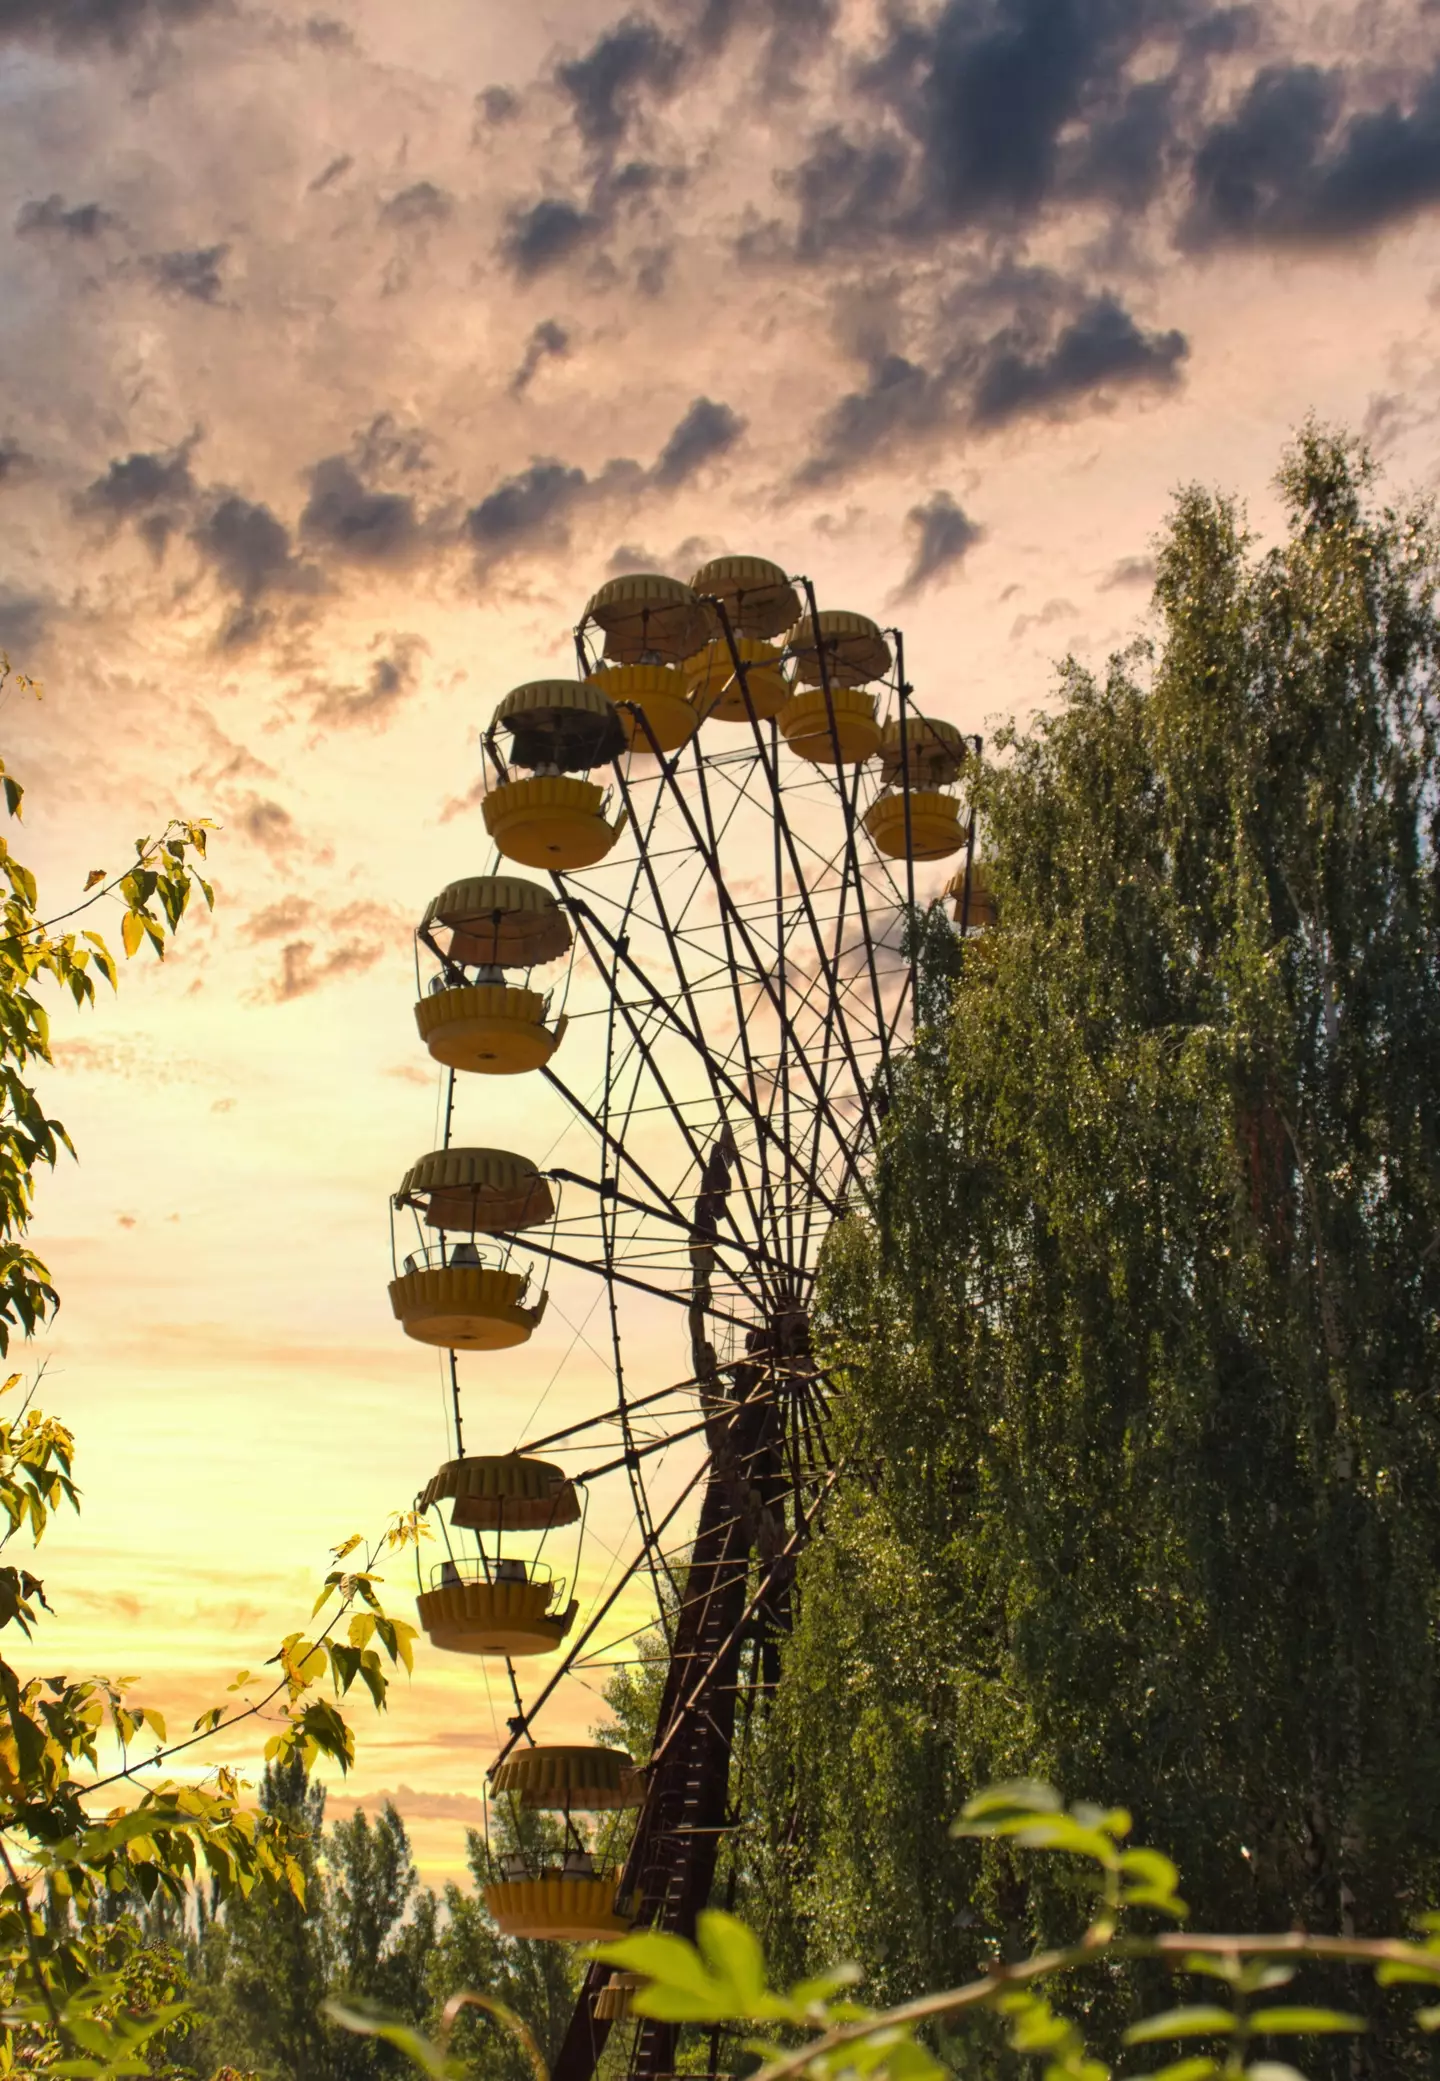 Pripyat's ferris wheel is a notorious landmark in the abandoned town.